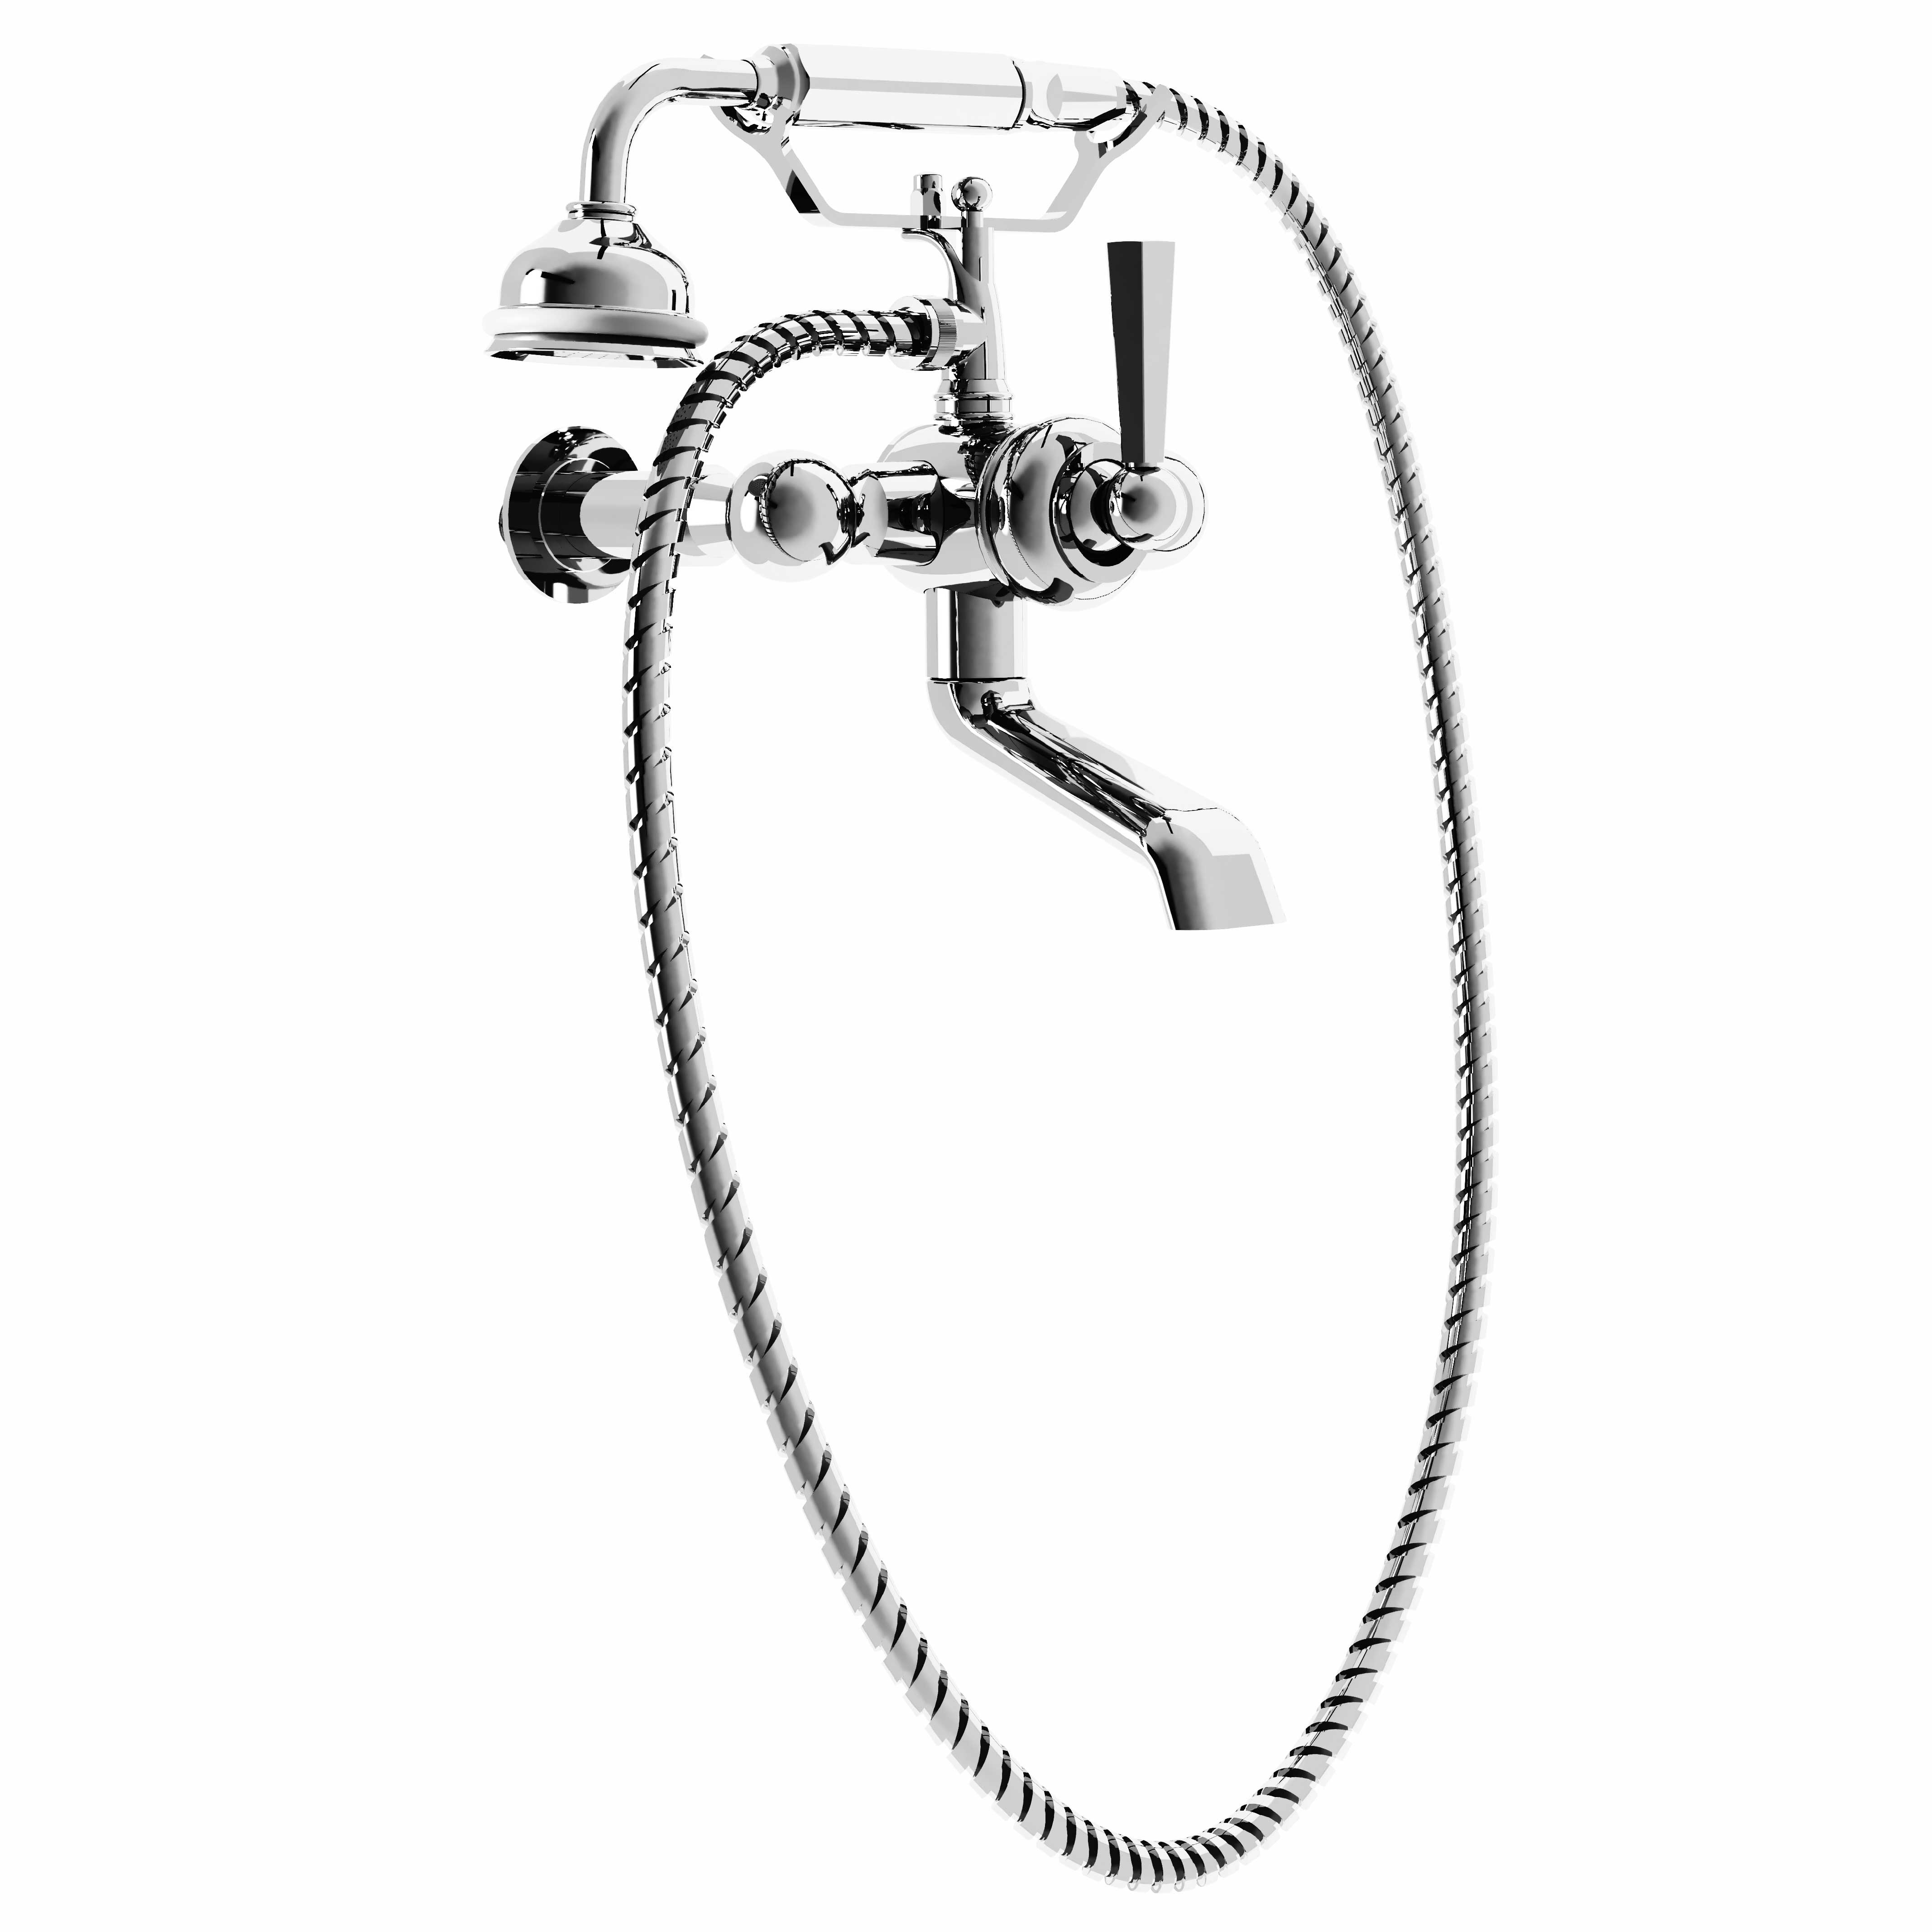 M38-3201M Wall mounted single-lever bath & shower mixer